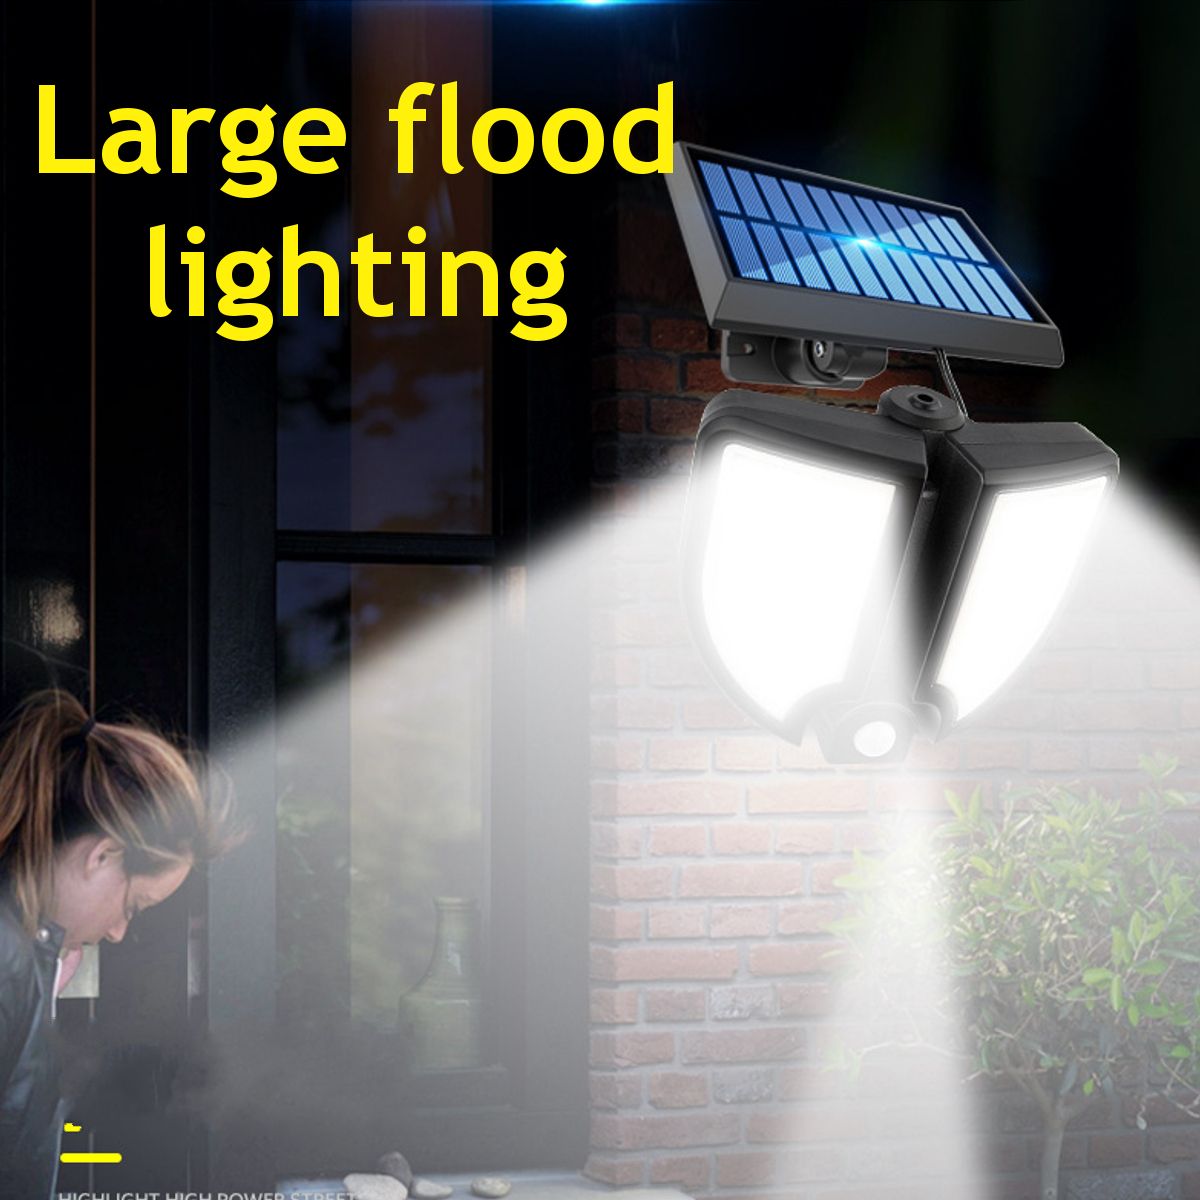 90LED-Solar-Motion-Sensor-Garden-Light-IP67-Outdoor-Security-Wall-Lamp-Floodlight-with-Remote-Contro-1769945